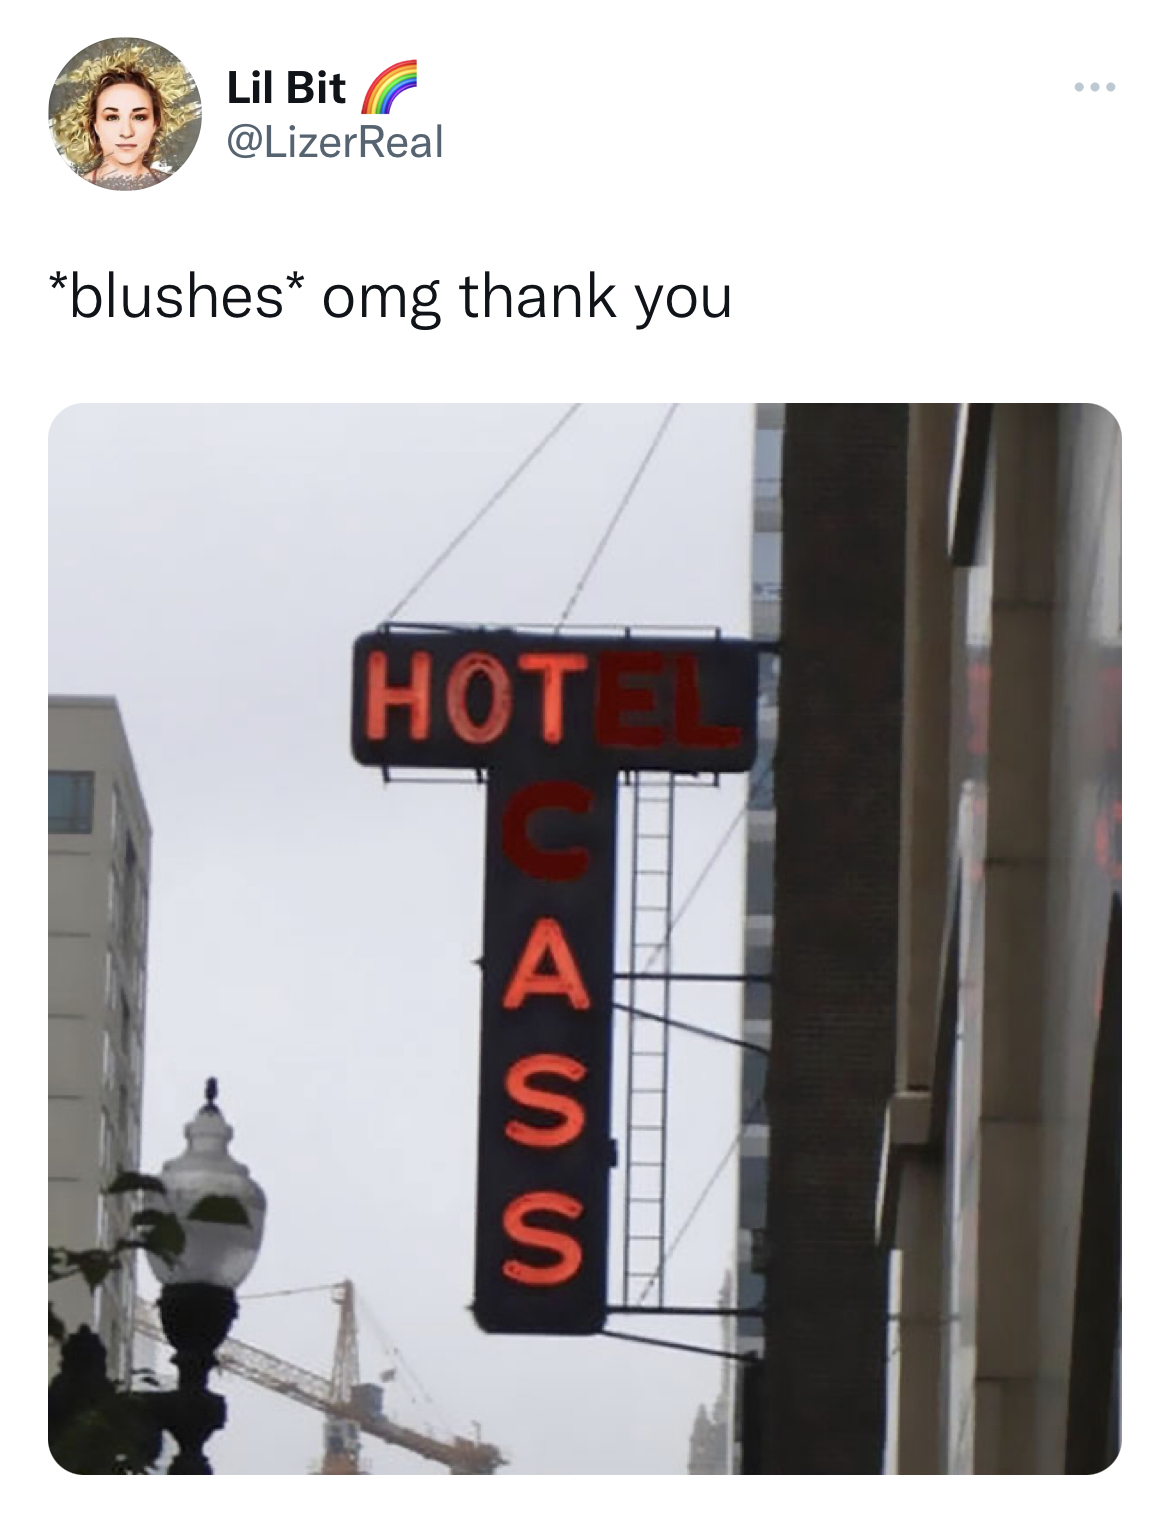 Fresh Daily Tweets - sign fails - Lil Bit blushes omg thank you Hot A S S